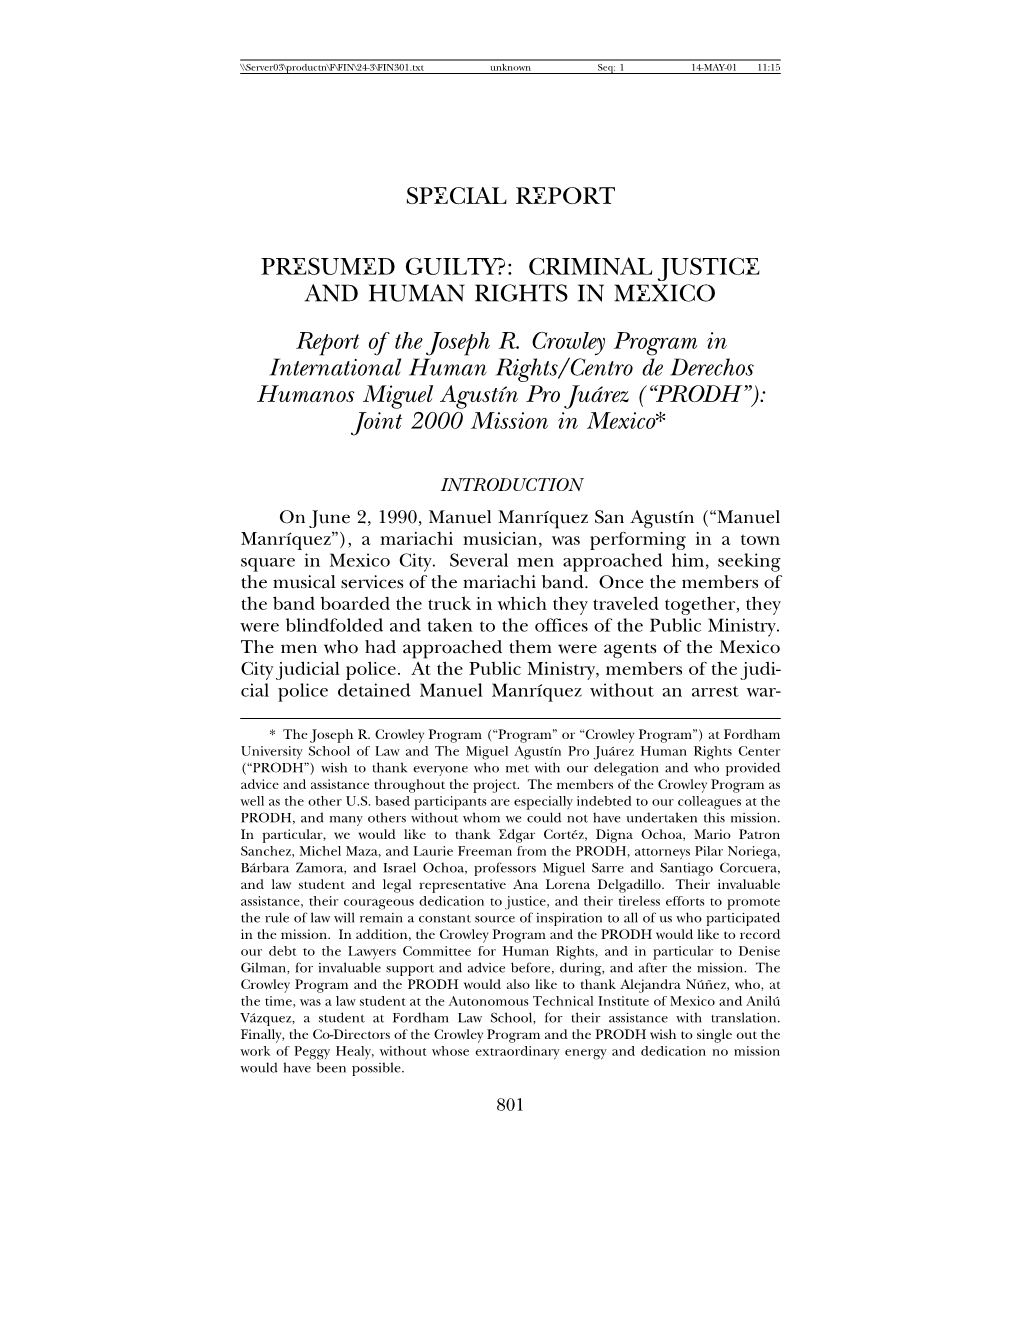 CRIMINAL JUSTICE and HUMAN RIGHTS in MEXICO Report of the Joseph R